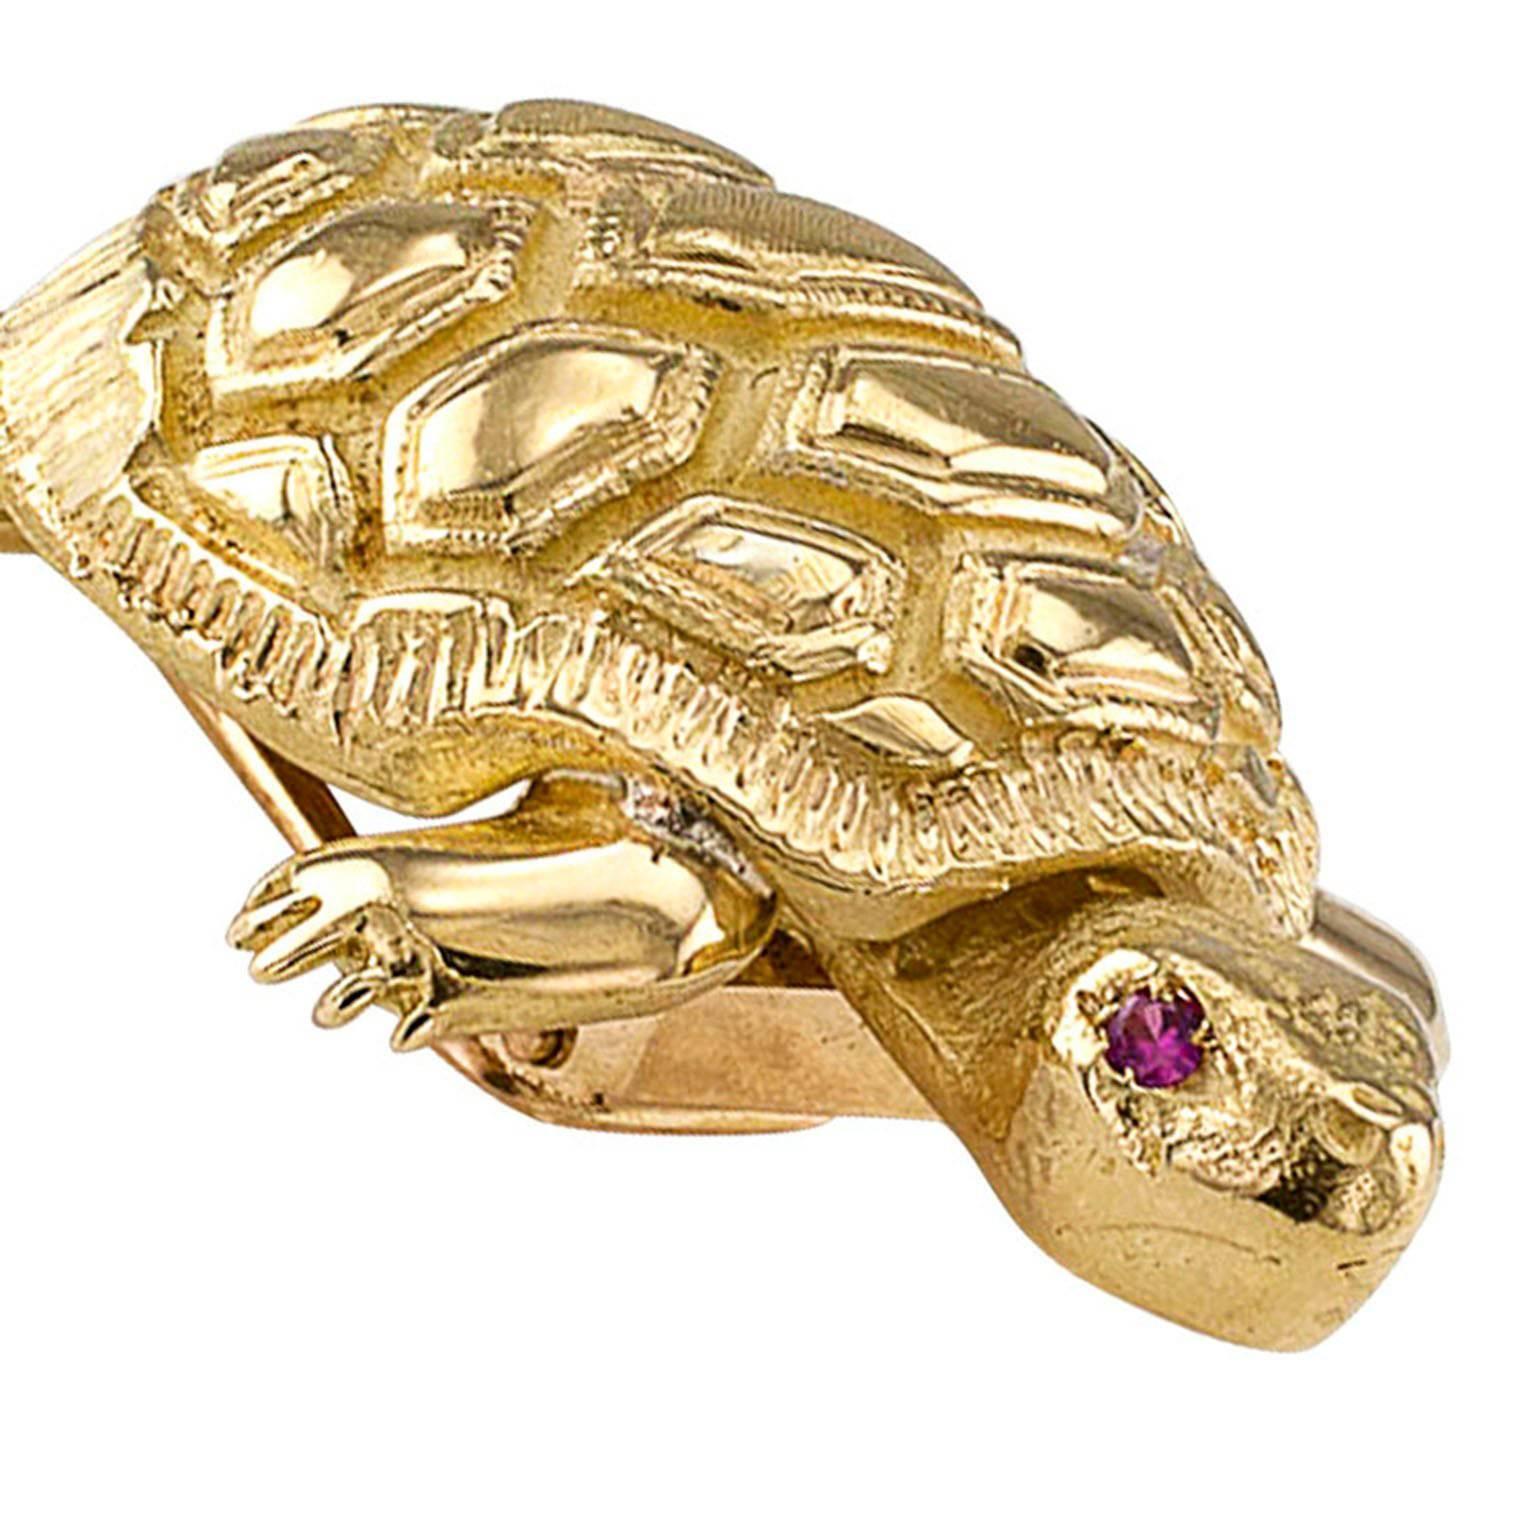 1960s 18 Karat Gold and Ruby Turtle Brooch

Land turtle 18-karat yellow gold clip/brooch with ruby eyes, circa 1960.  For some reason unknown to us, we come across a lot of turtle brooches depicting sea turtles, land turtles not very often.  It is